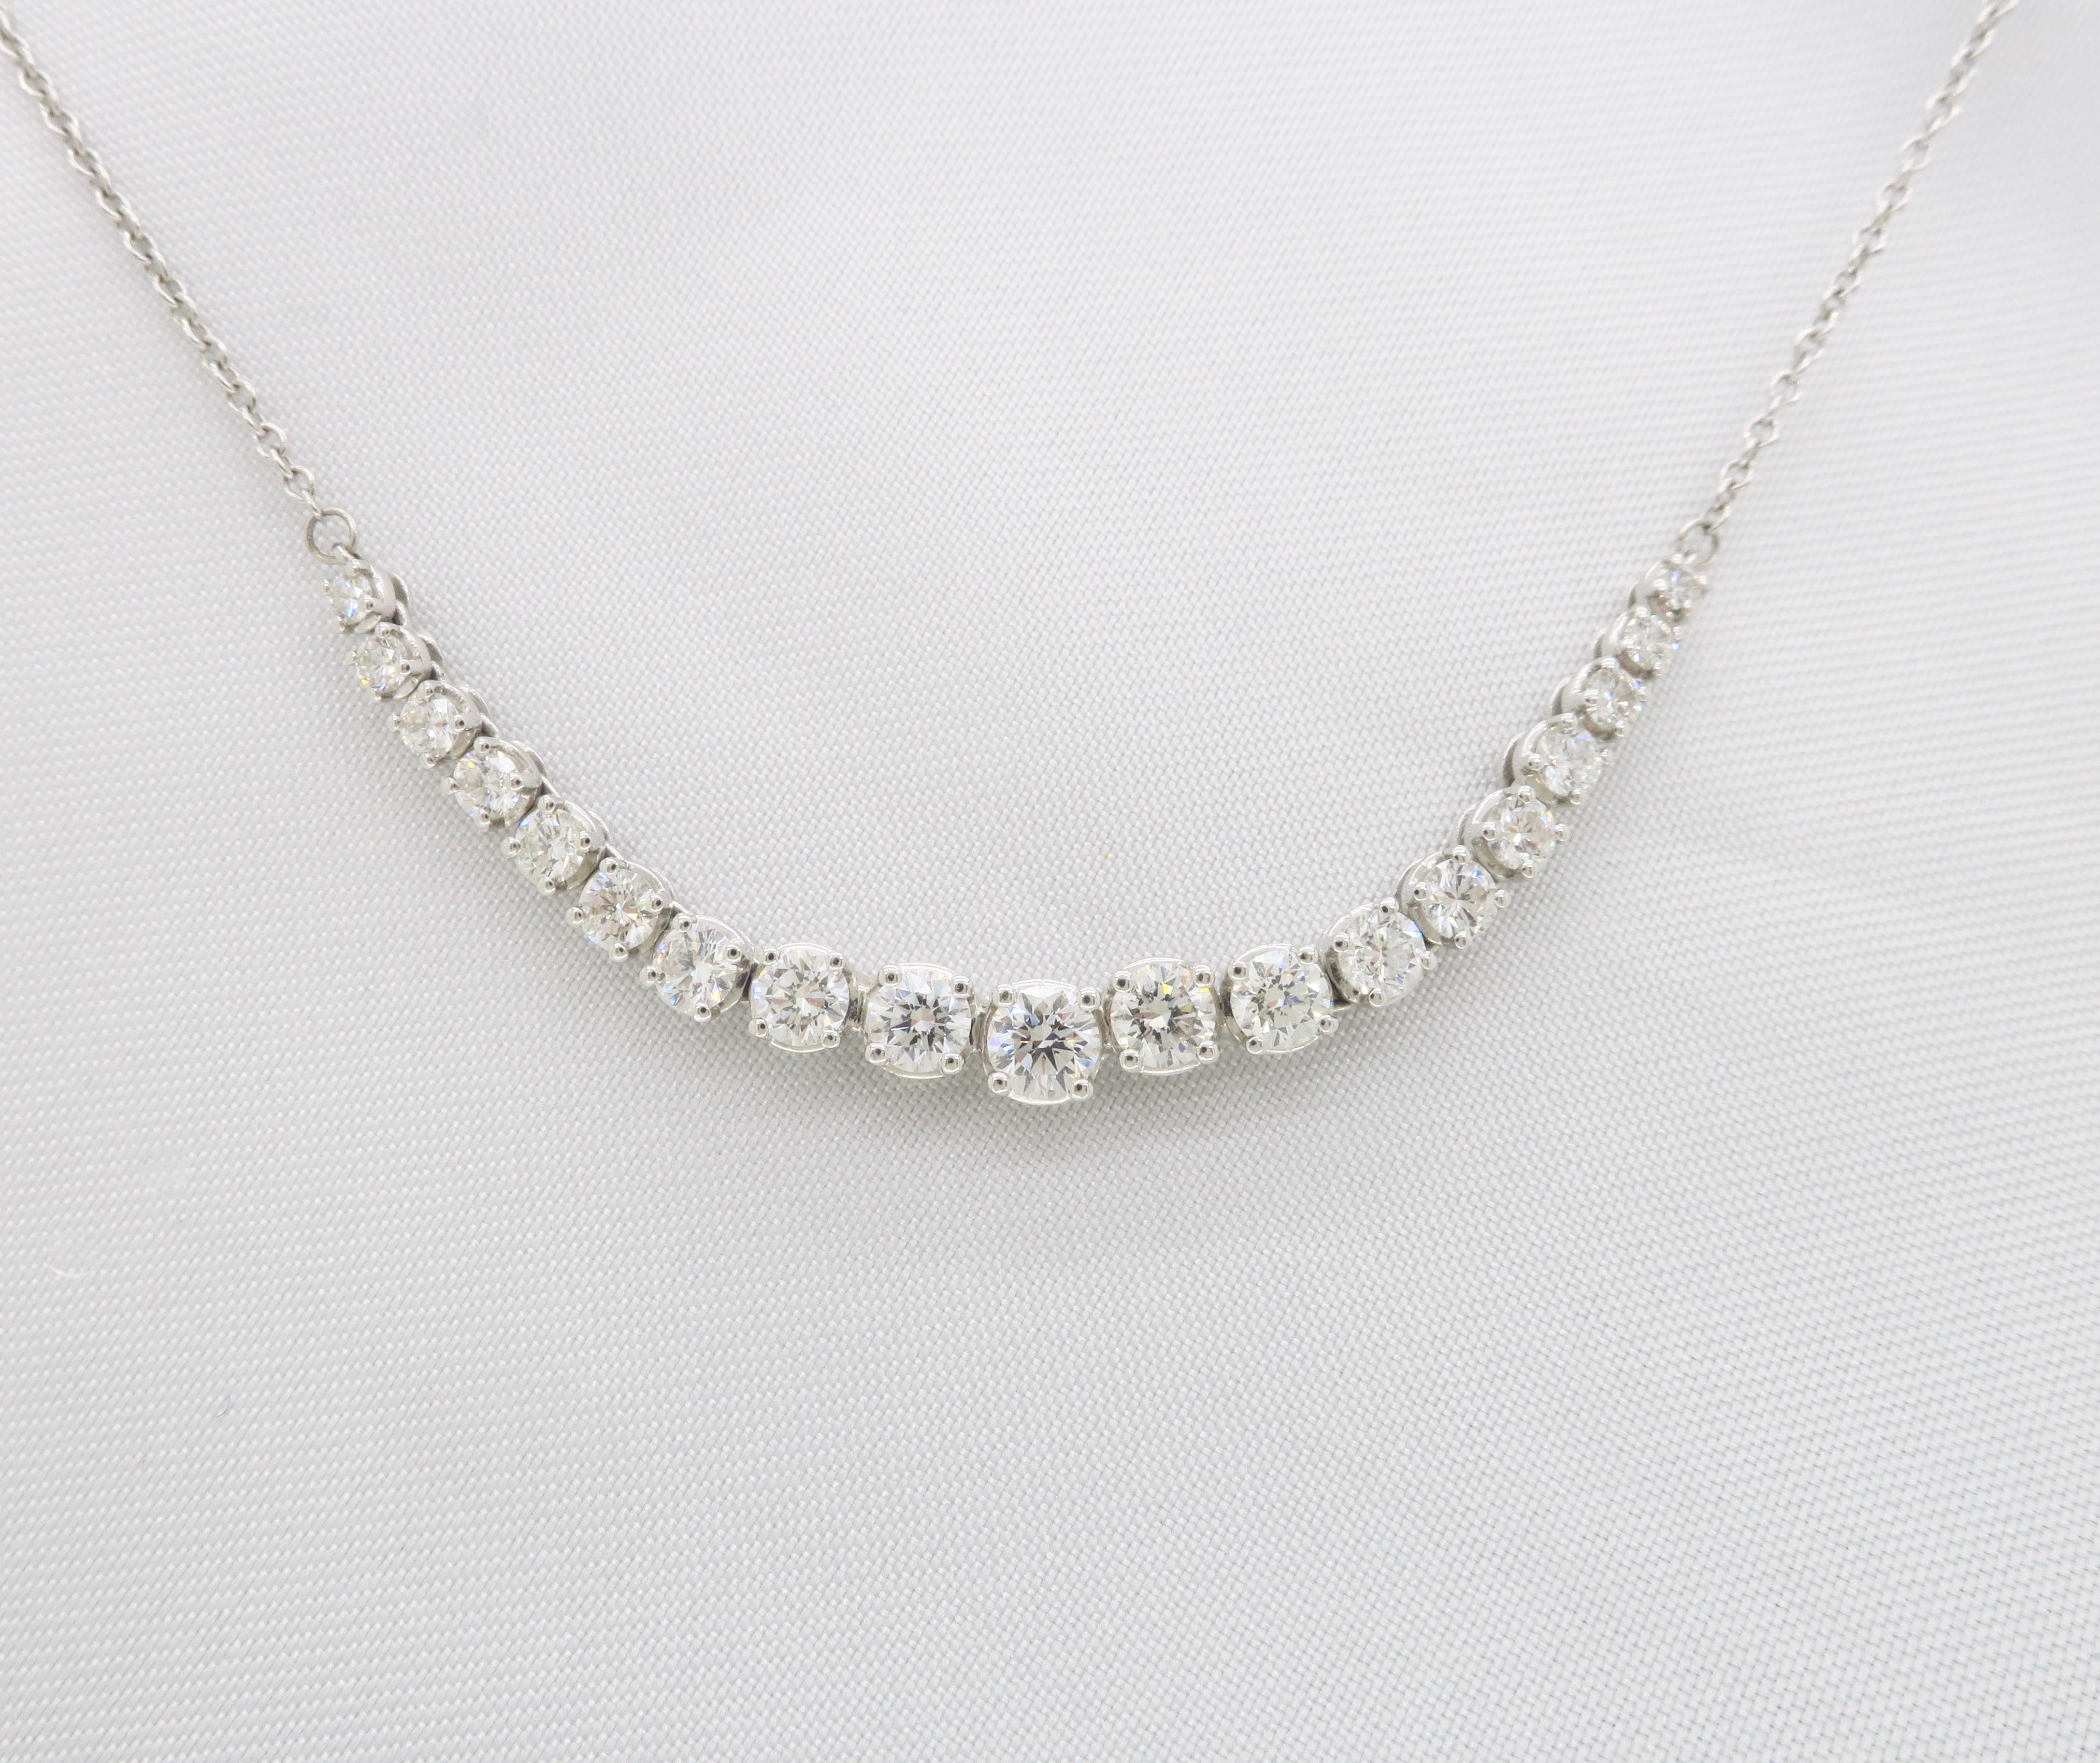 KWIAT Demi-Riviera necklace made in 18k white gold with 1.00CTW of Round Brilliant cut diamonds. 

Total Diamond Carat Weight: 1.00CTW
Diamond Cut: Round Brilliant Cut 
Color: Average F-G
Clarity: Average VS-SI
Metal: 18K White Gold
Stamped: